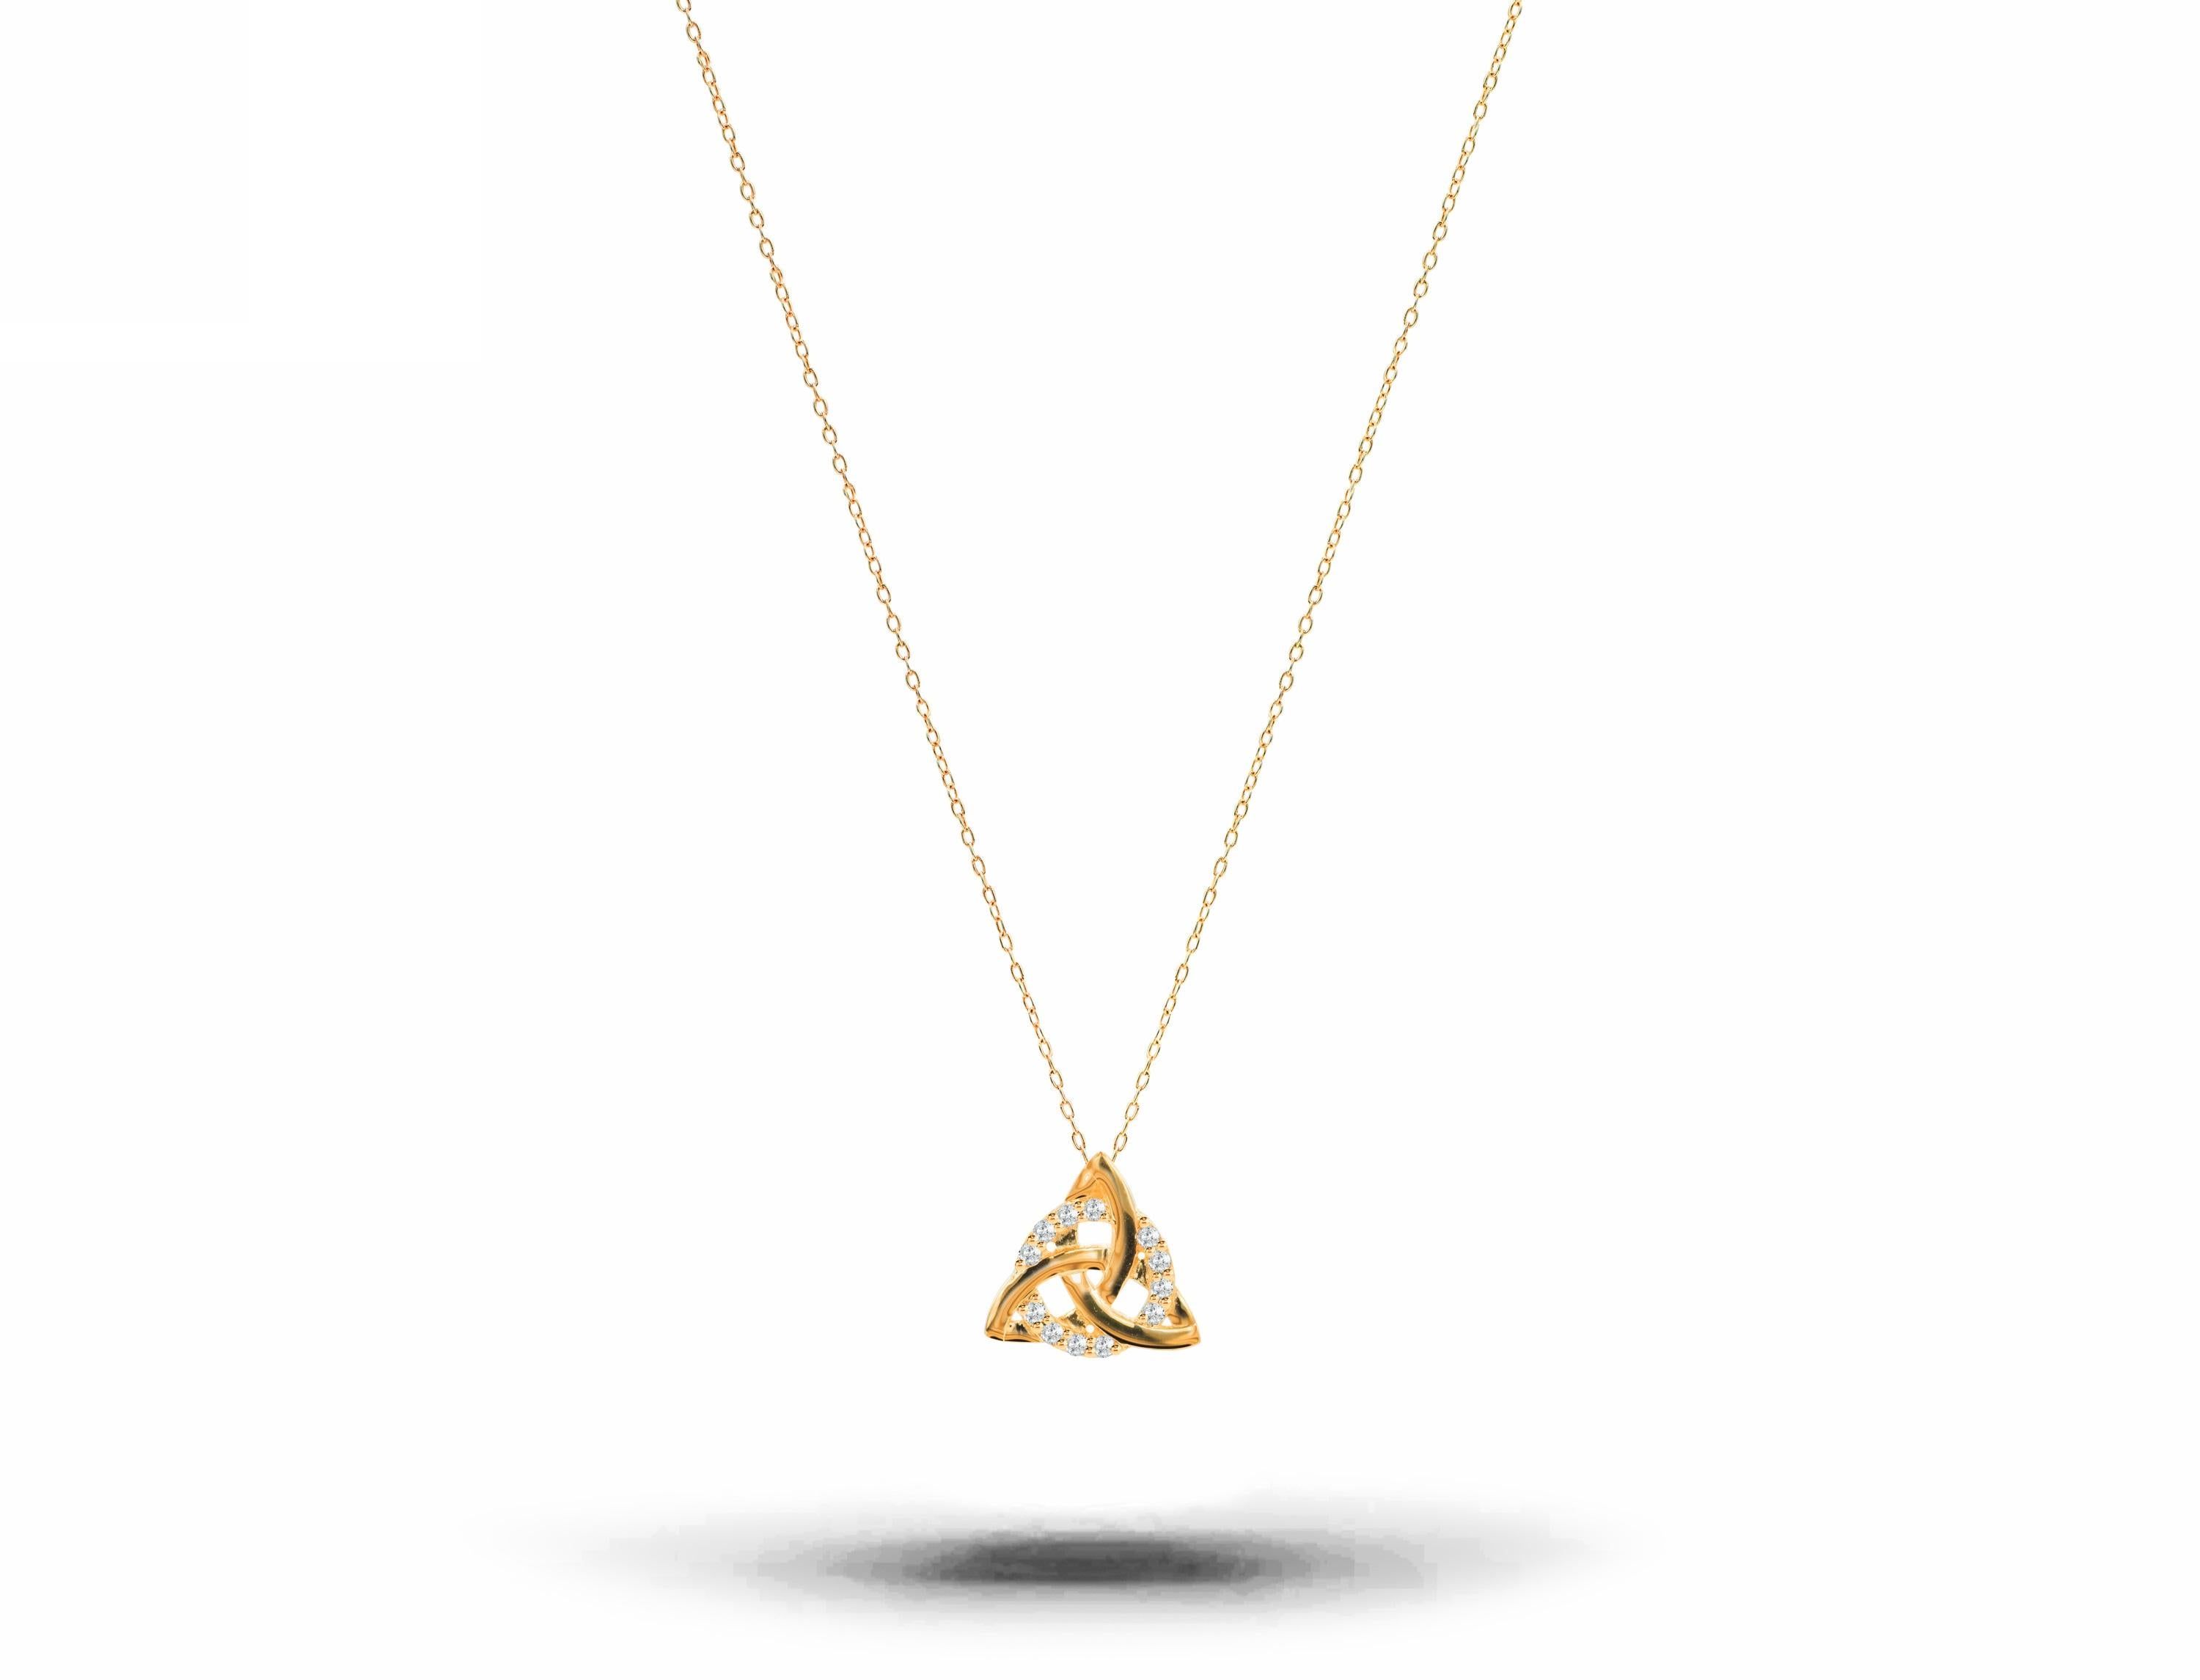 A beautiful little Celtic Knot Pendant is made of 14k solid gold adorned with natural white round cut diamonds.
Available in three colors of gold: White Gold / Rose Gold / Yellow Gold.

Perfect for wearing by itself for a minimal everyday style or